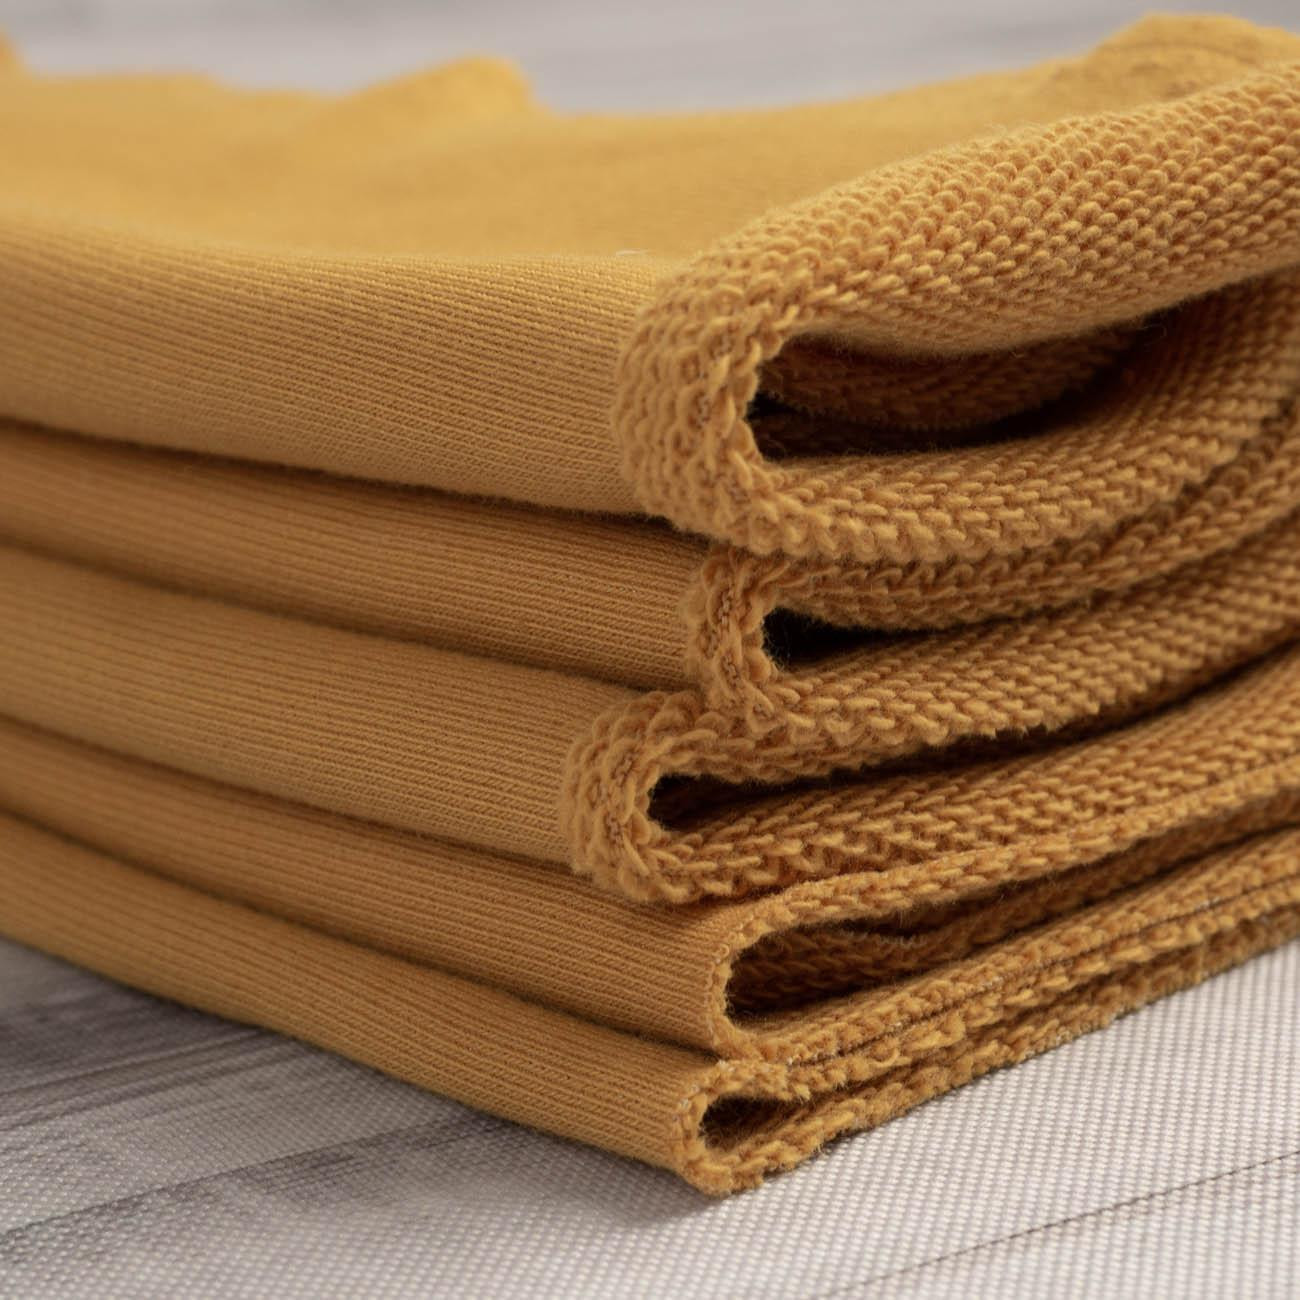 D-09 MUSTARD - thick looped knit 